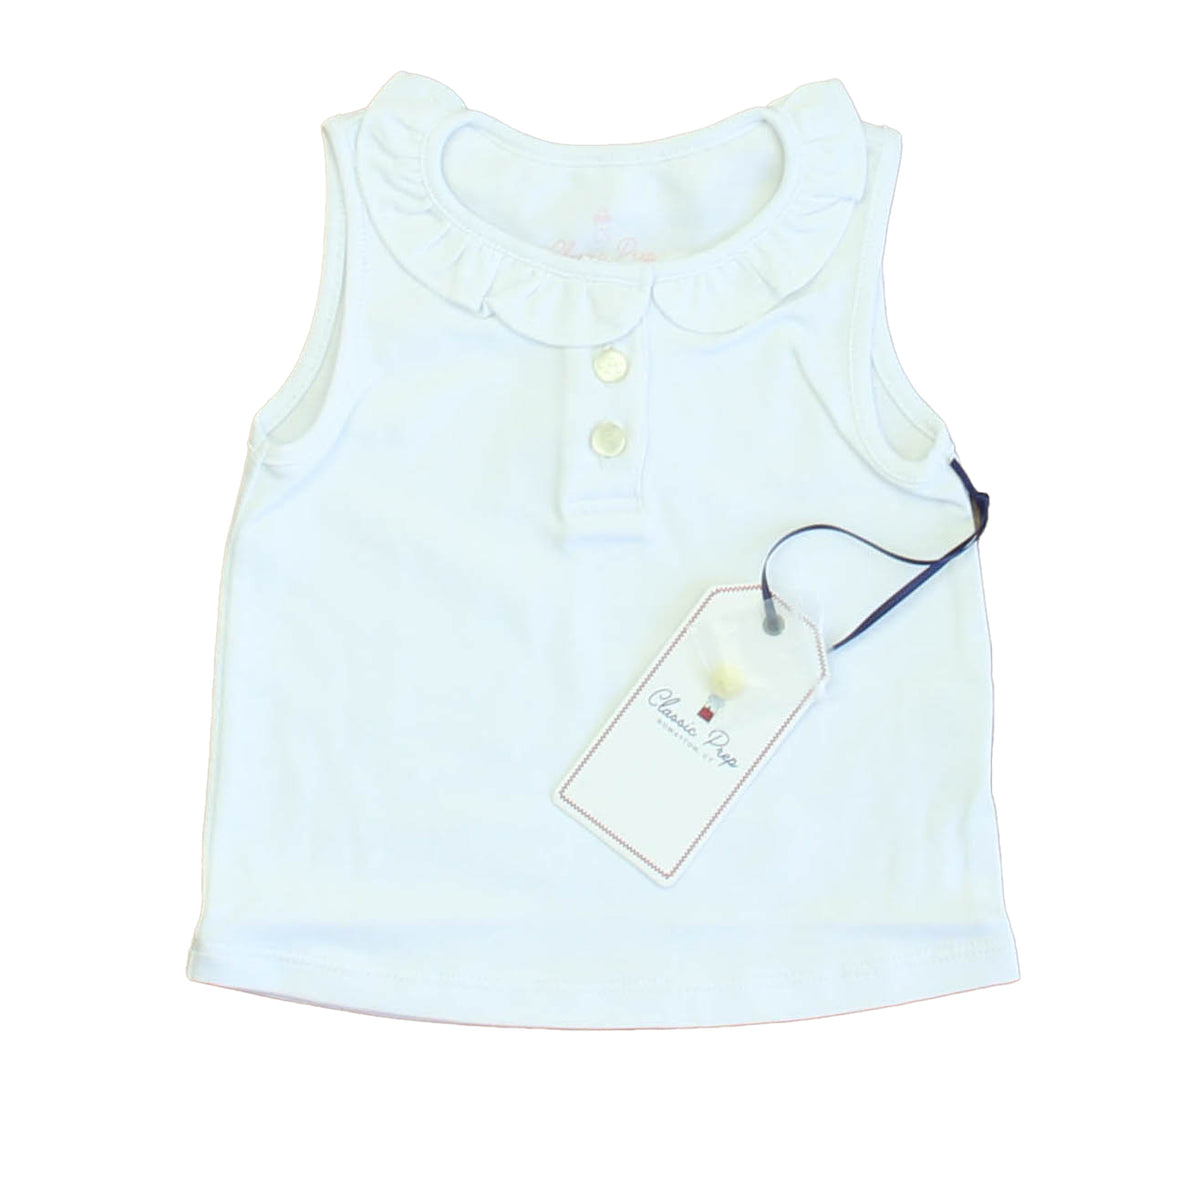 New with Tags: Bright White Top size: 12-18 Months -- FINAL SALE